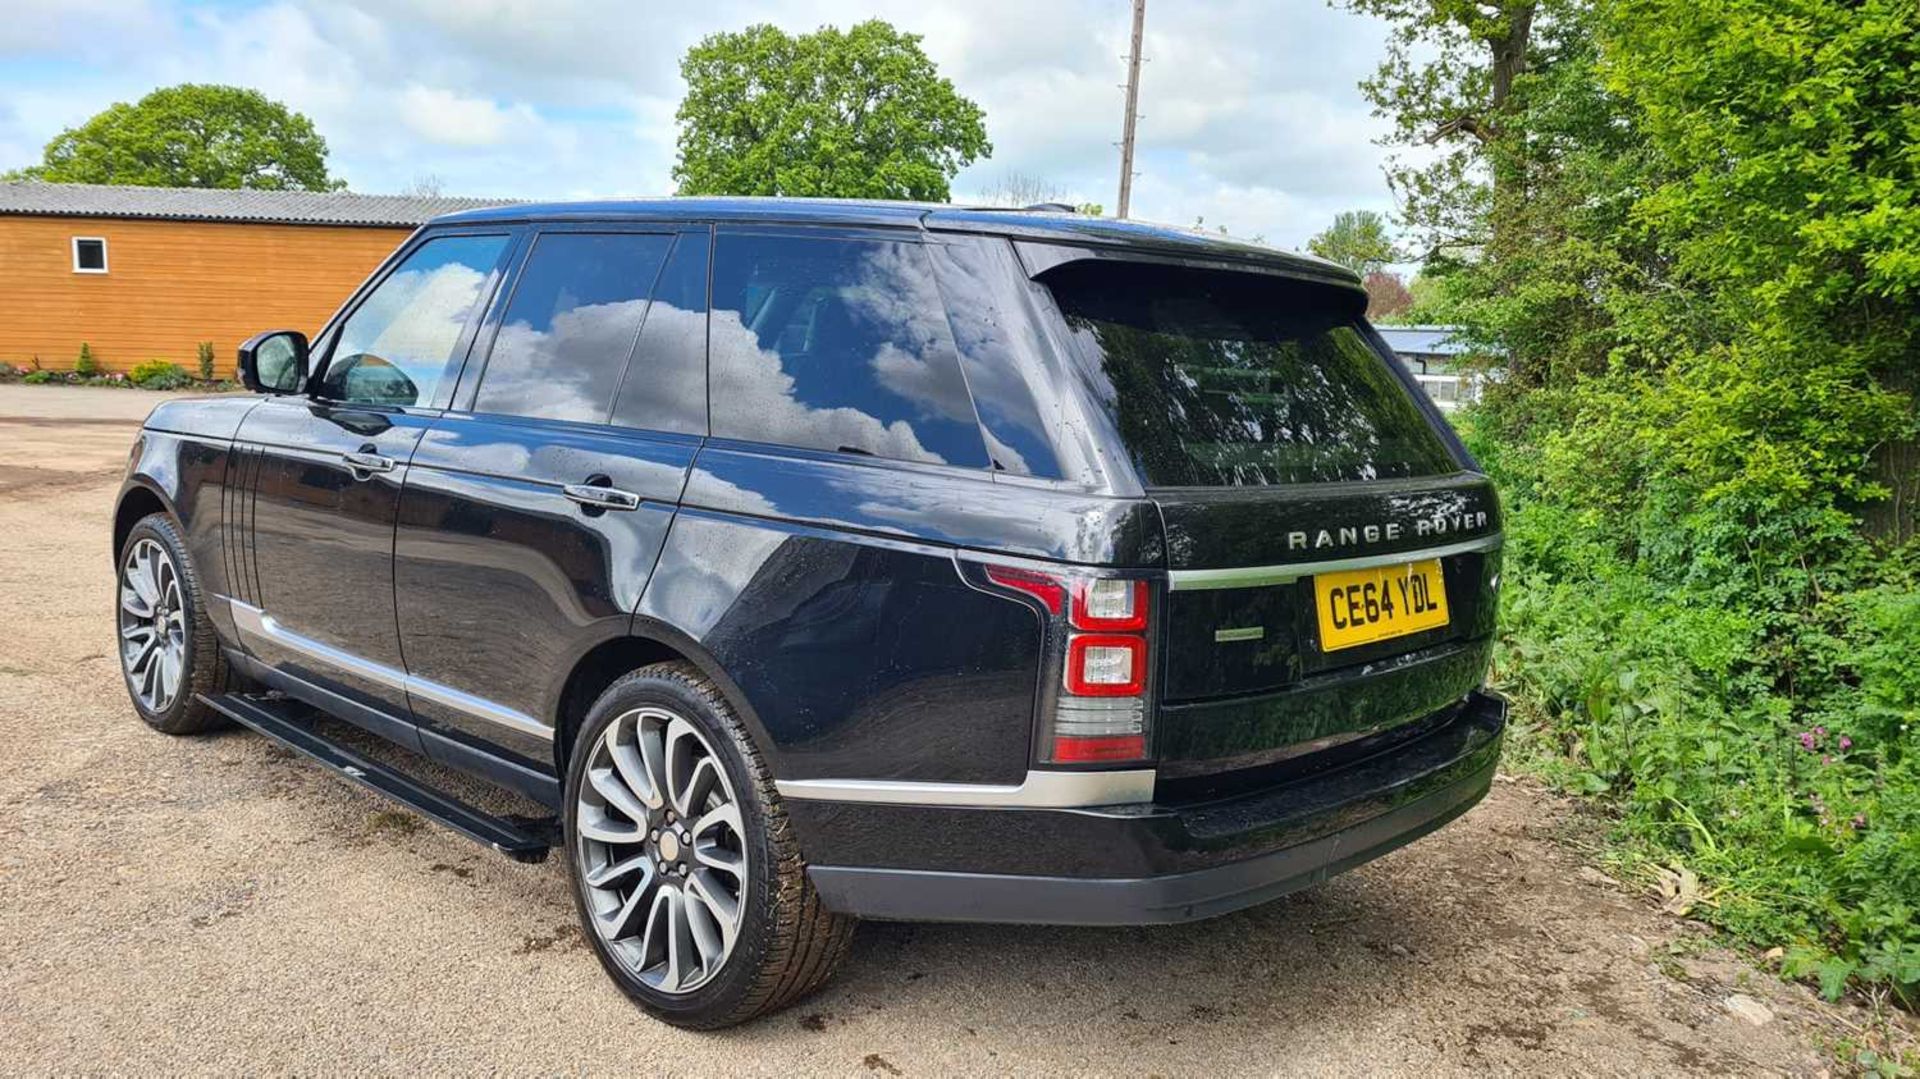 2014 Range Rover Autobiography SDV8, Auto, Paddle Shift, Parking Sensors, Full Leather, Heated Elect - Image 2 of 13